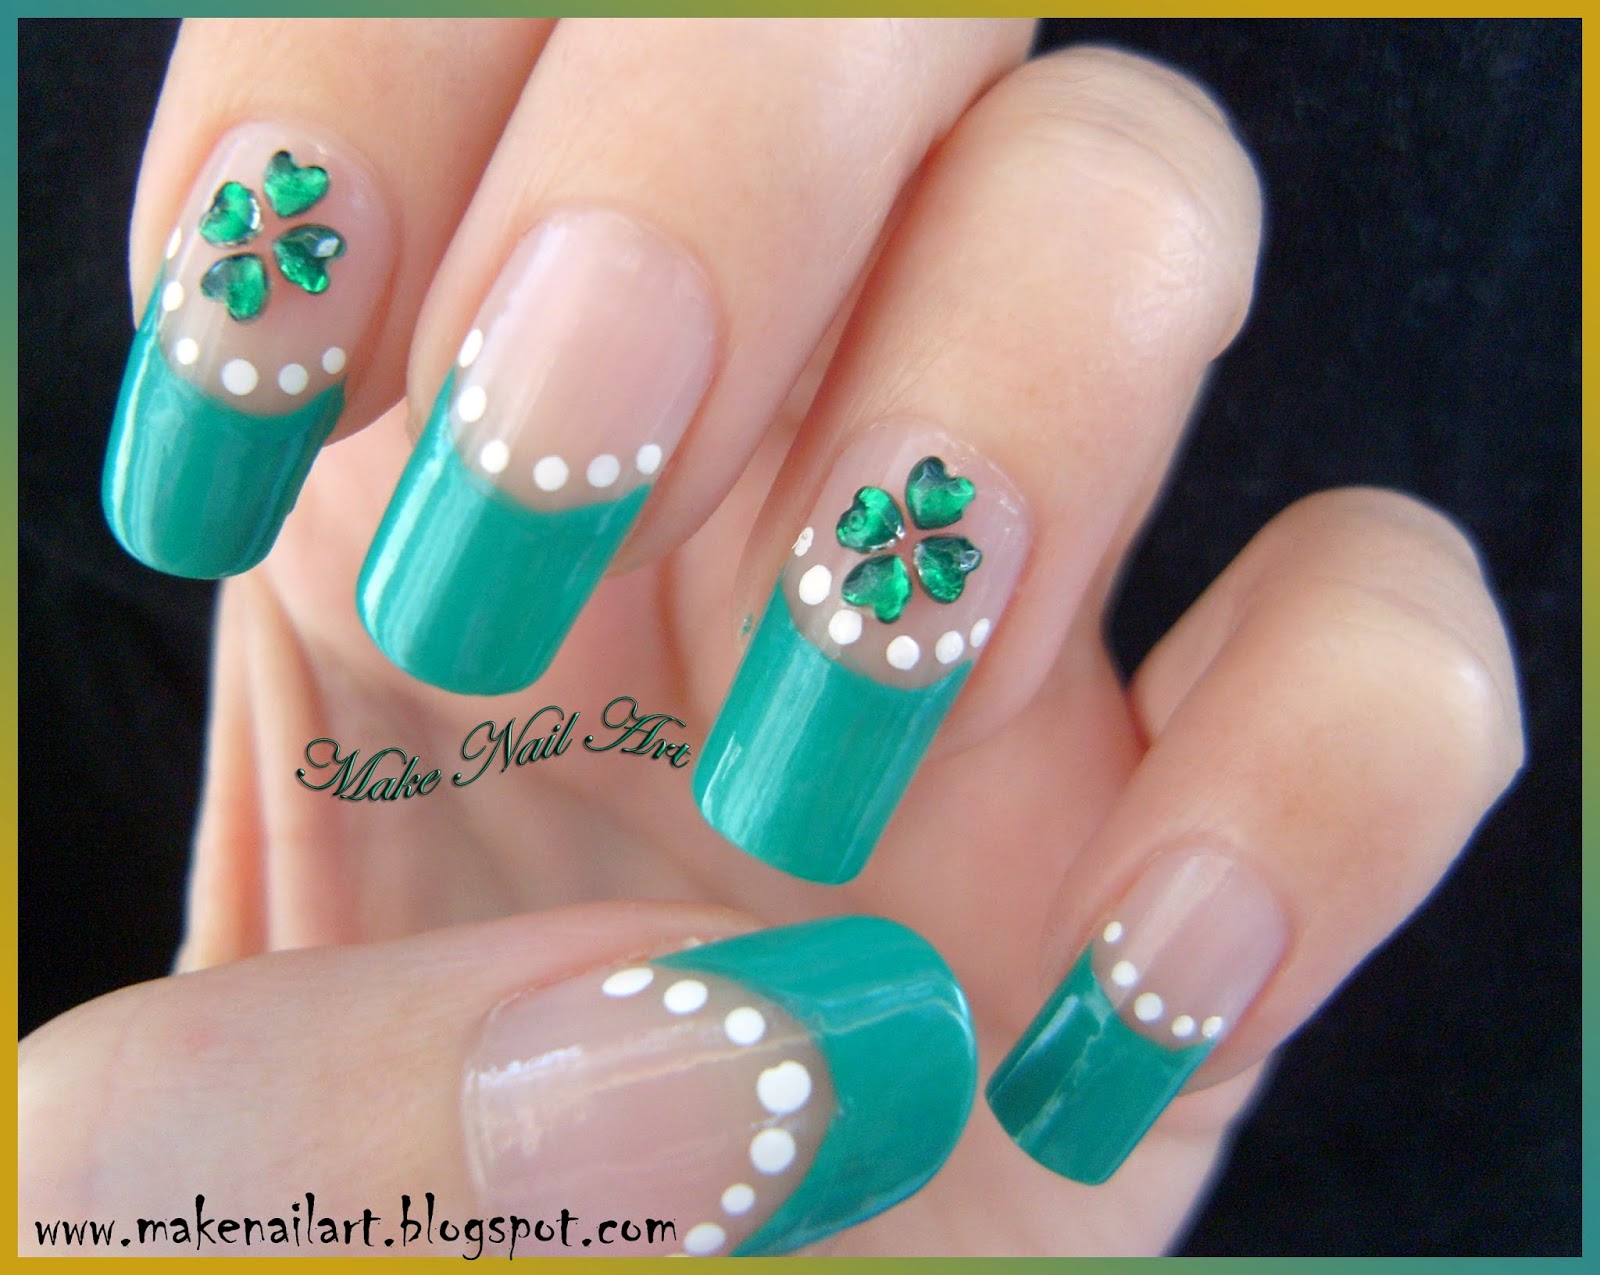 Clover Nail Art for St. Patrick's Day - wide 4